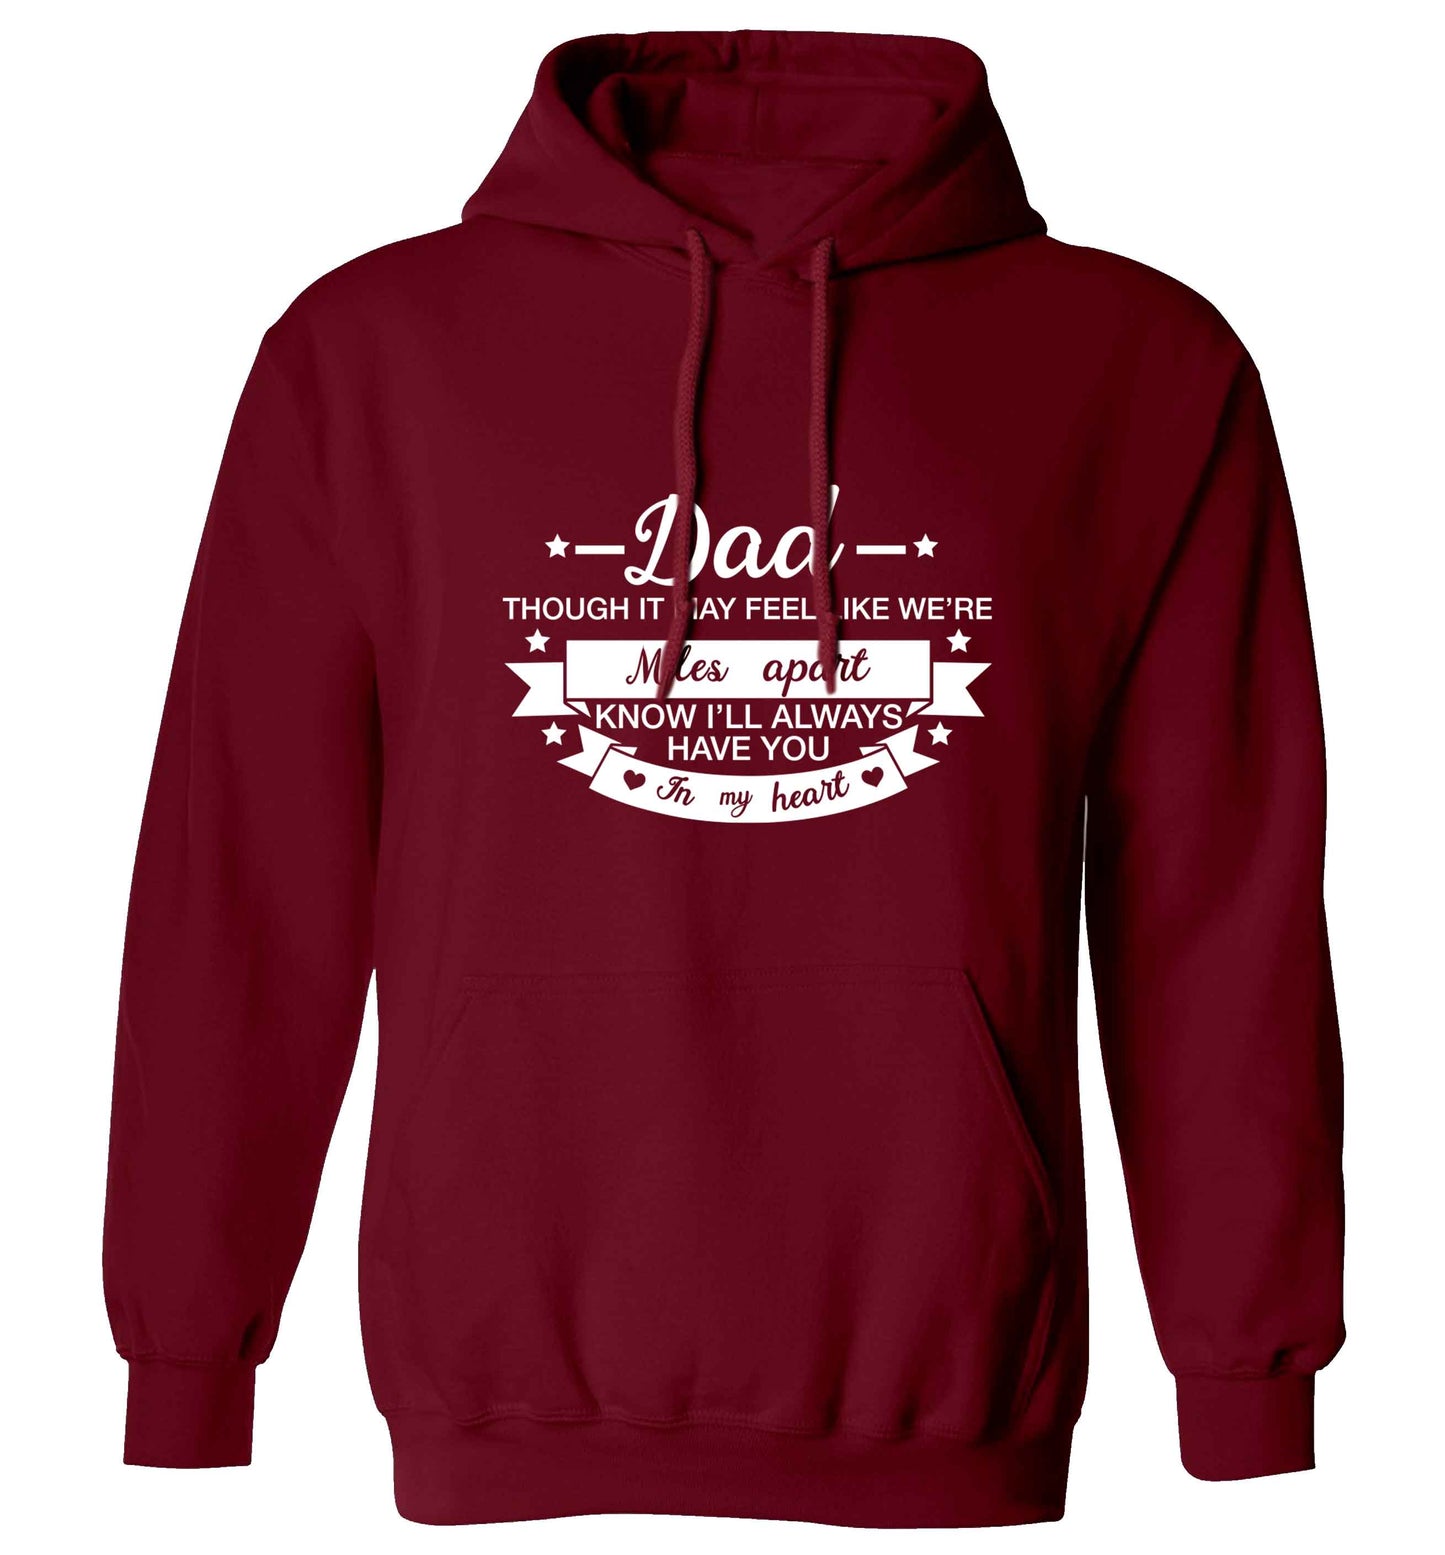 Dad though it may feel like we're miles apart know I'll always have you in my heart adults unisex maroon hoodie 2XL